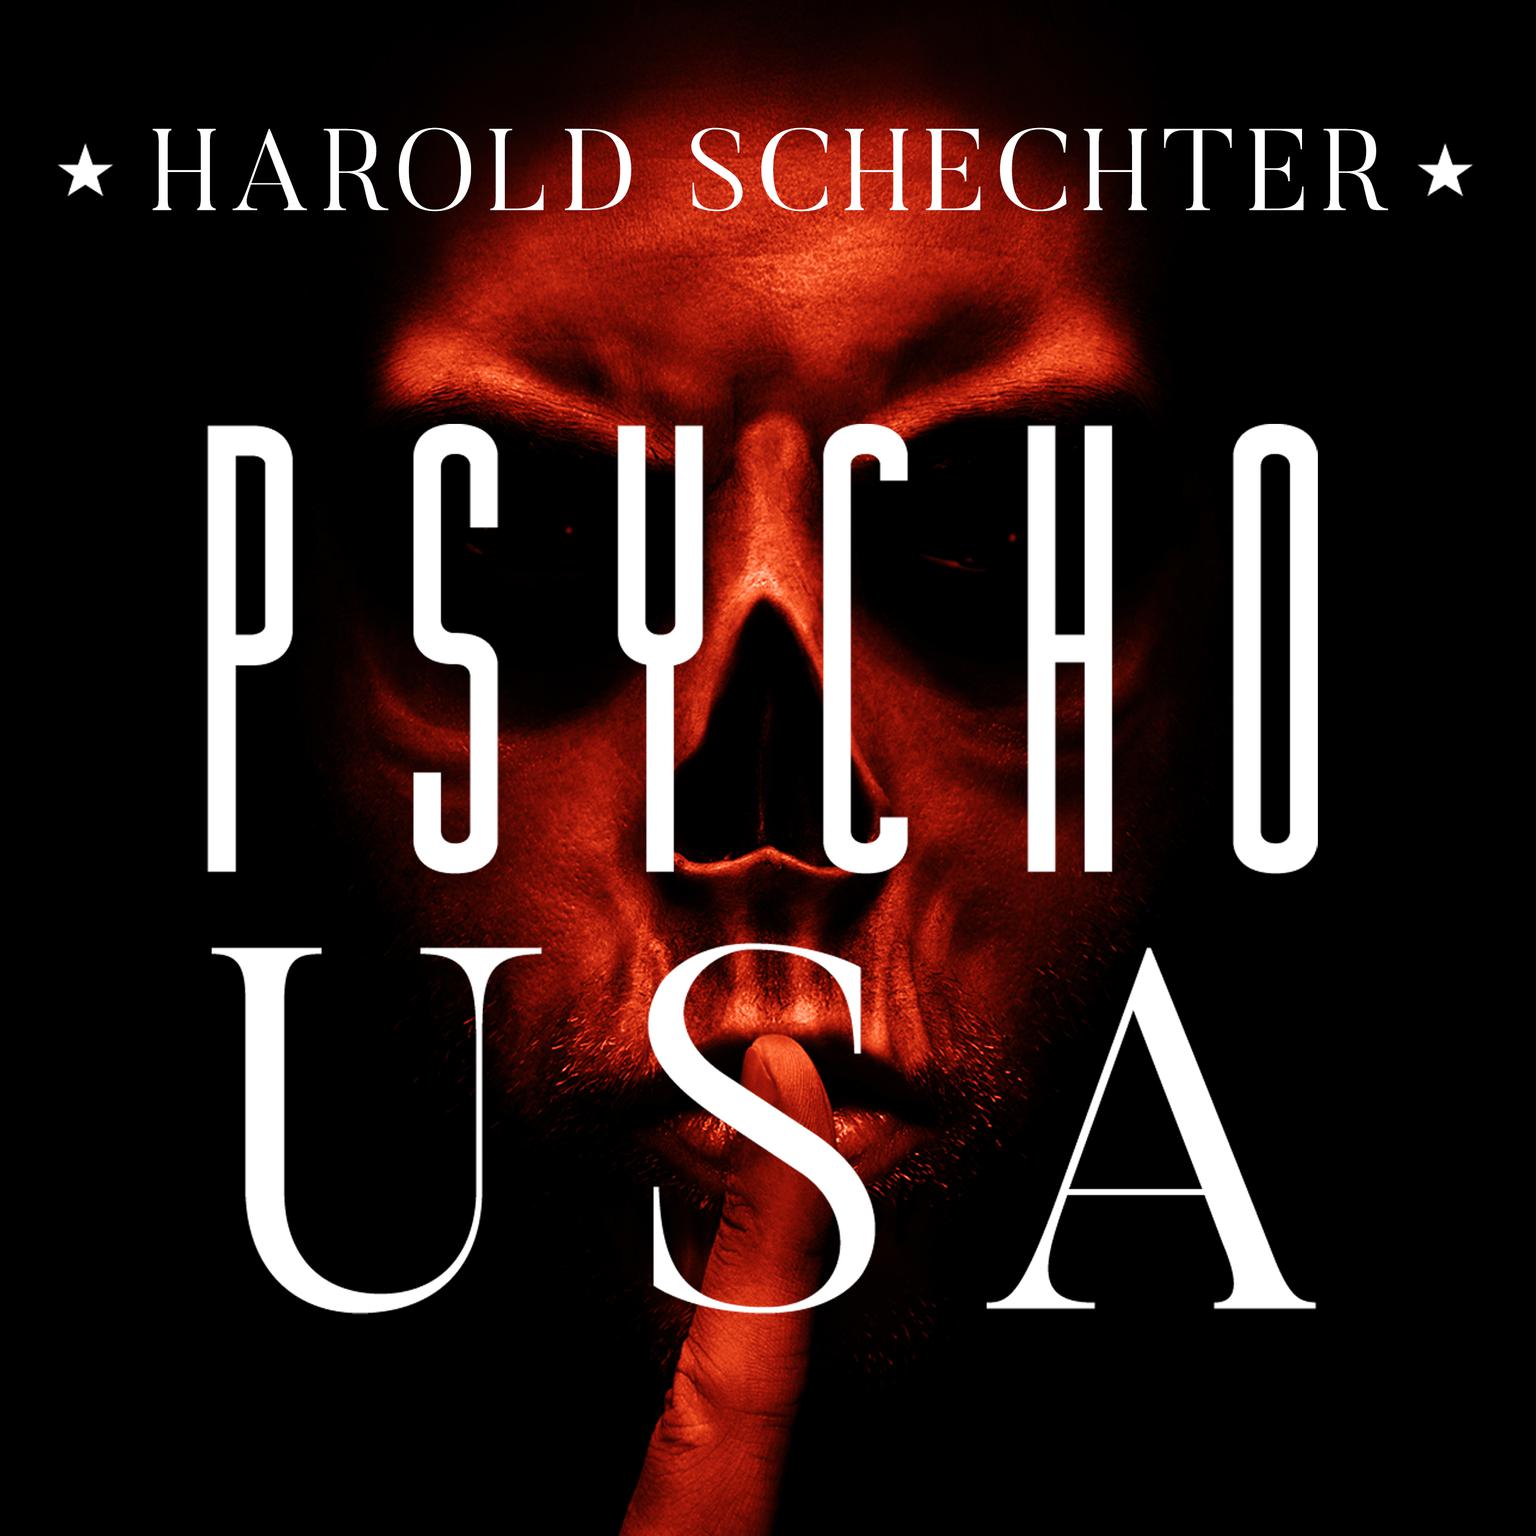 Psycho USA: Famous American Killers You Never Heard Of Audiobook, by Harold Schechter